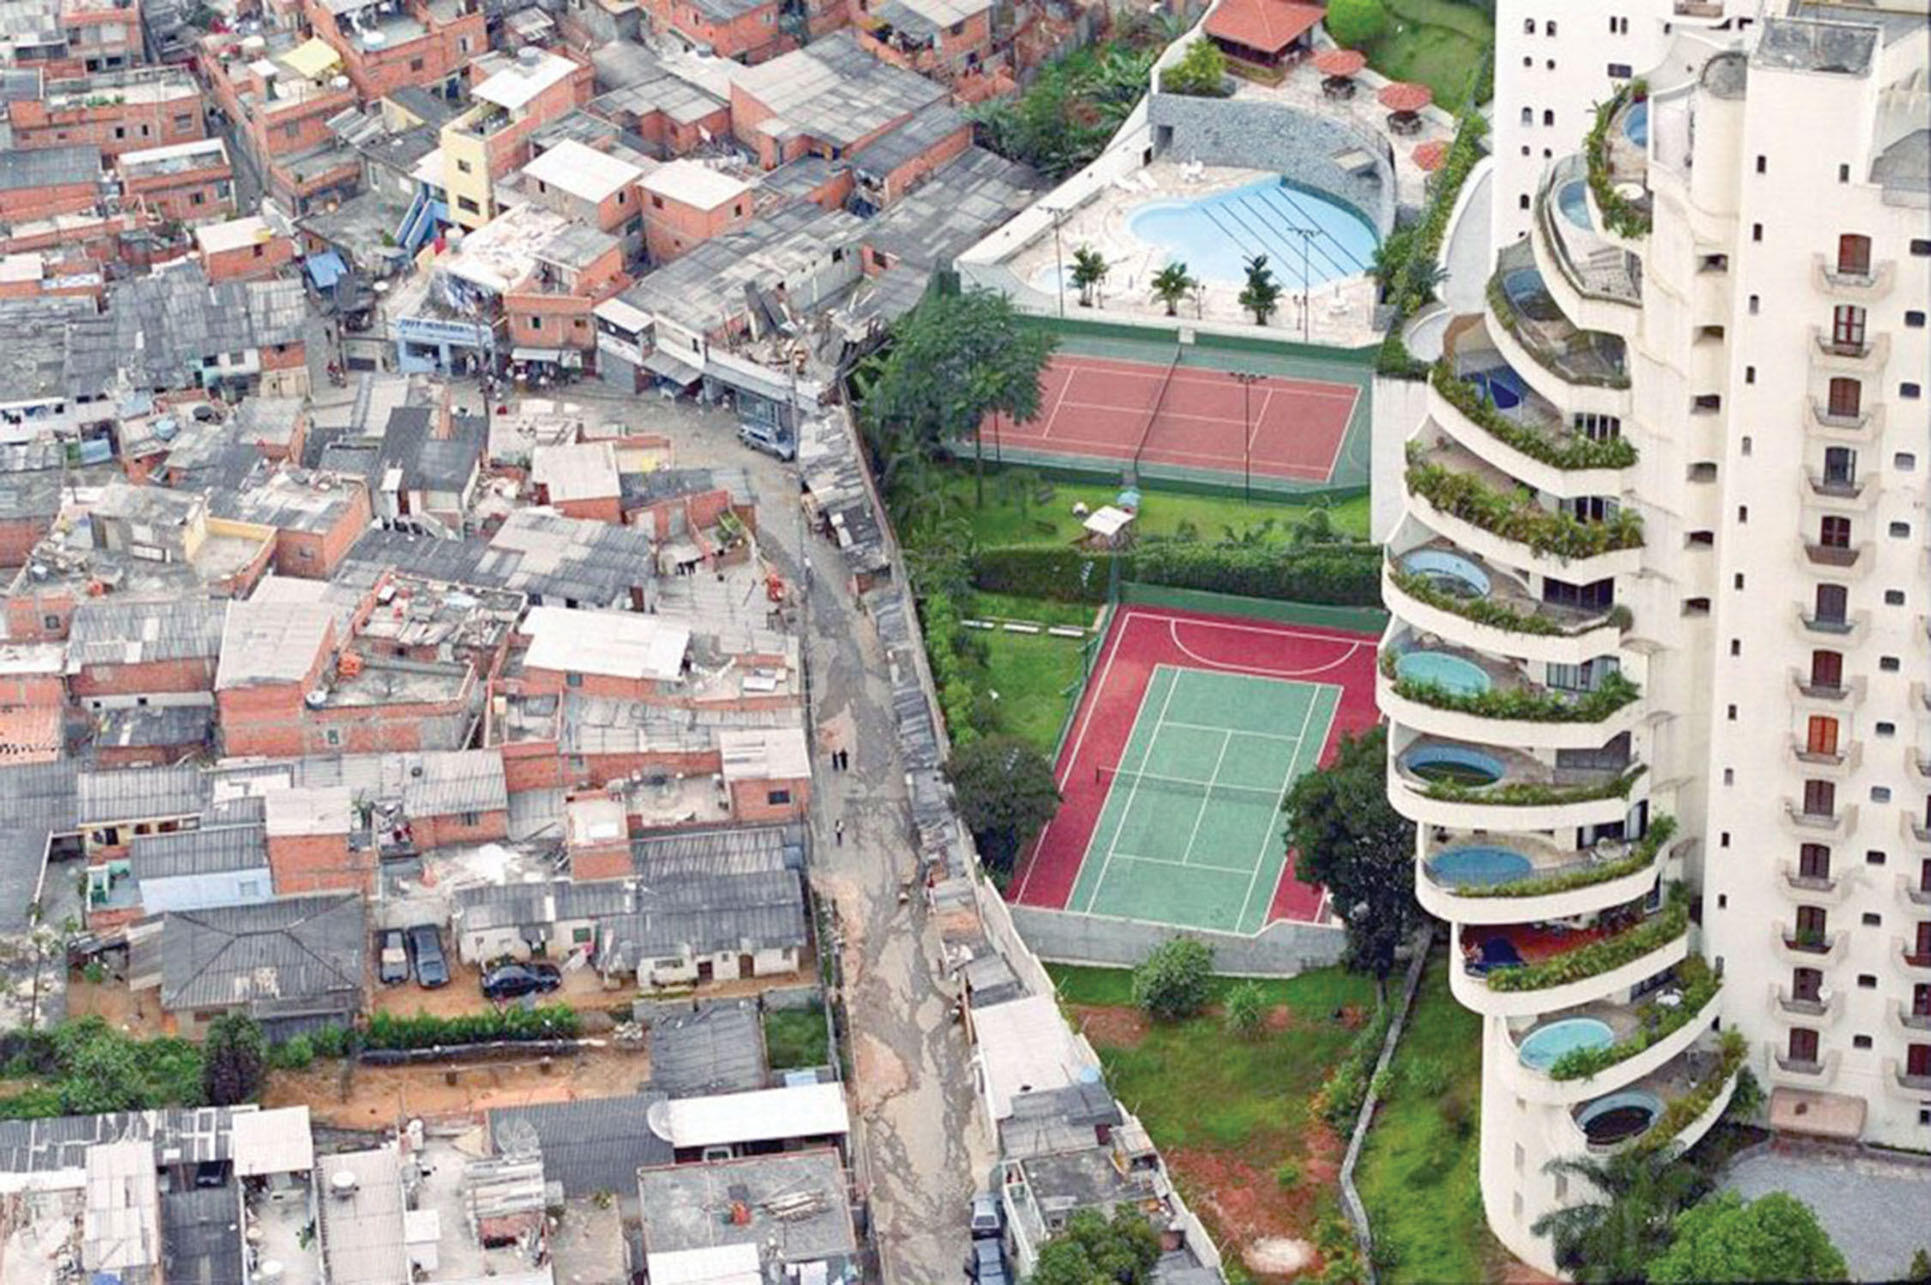 The Paraisópolis (Paradise City) favela is separated by a thin fence from an upscale apartment complex in São Paulo, Brazil. (Photo by Tuca Vieira.)